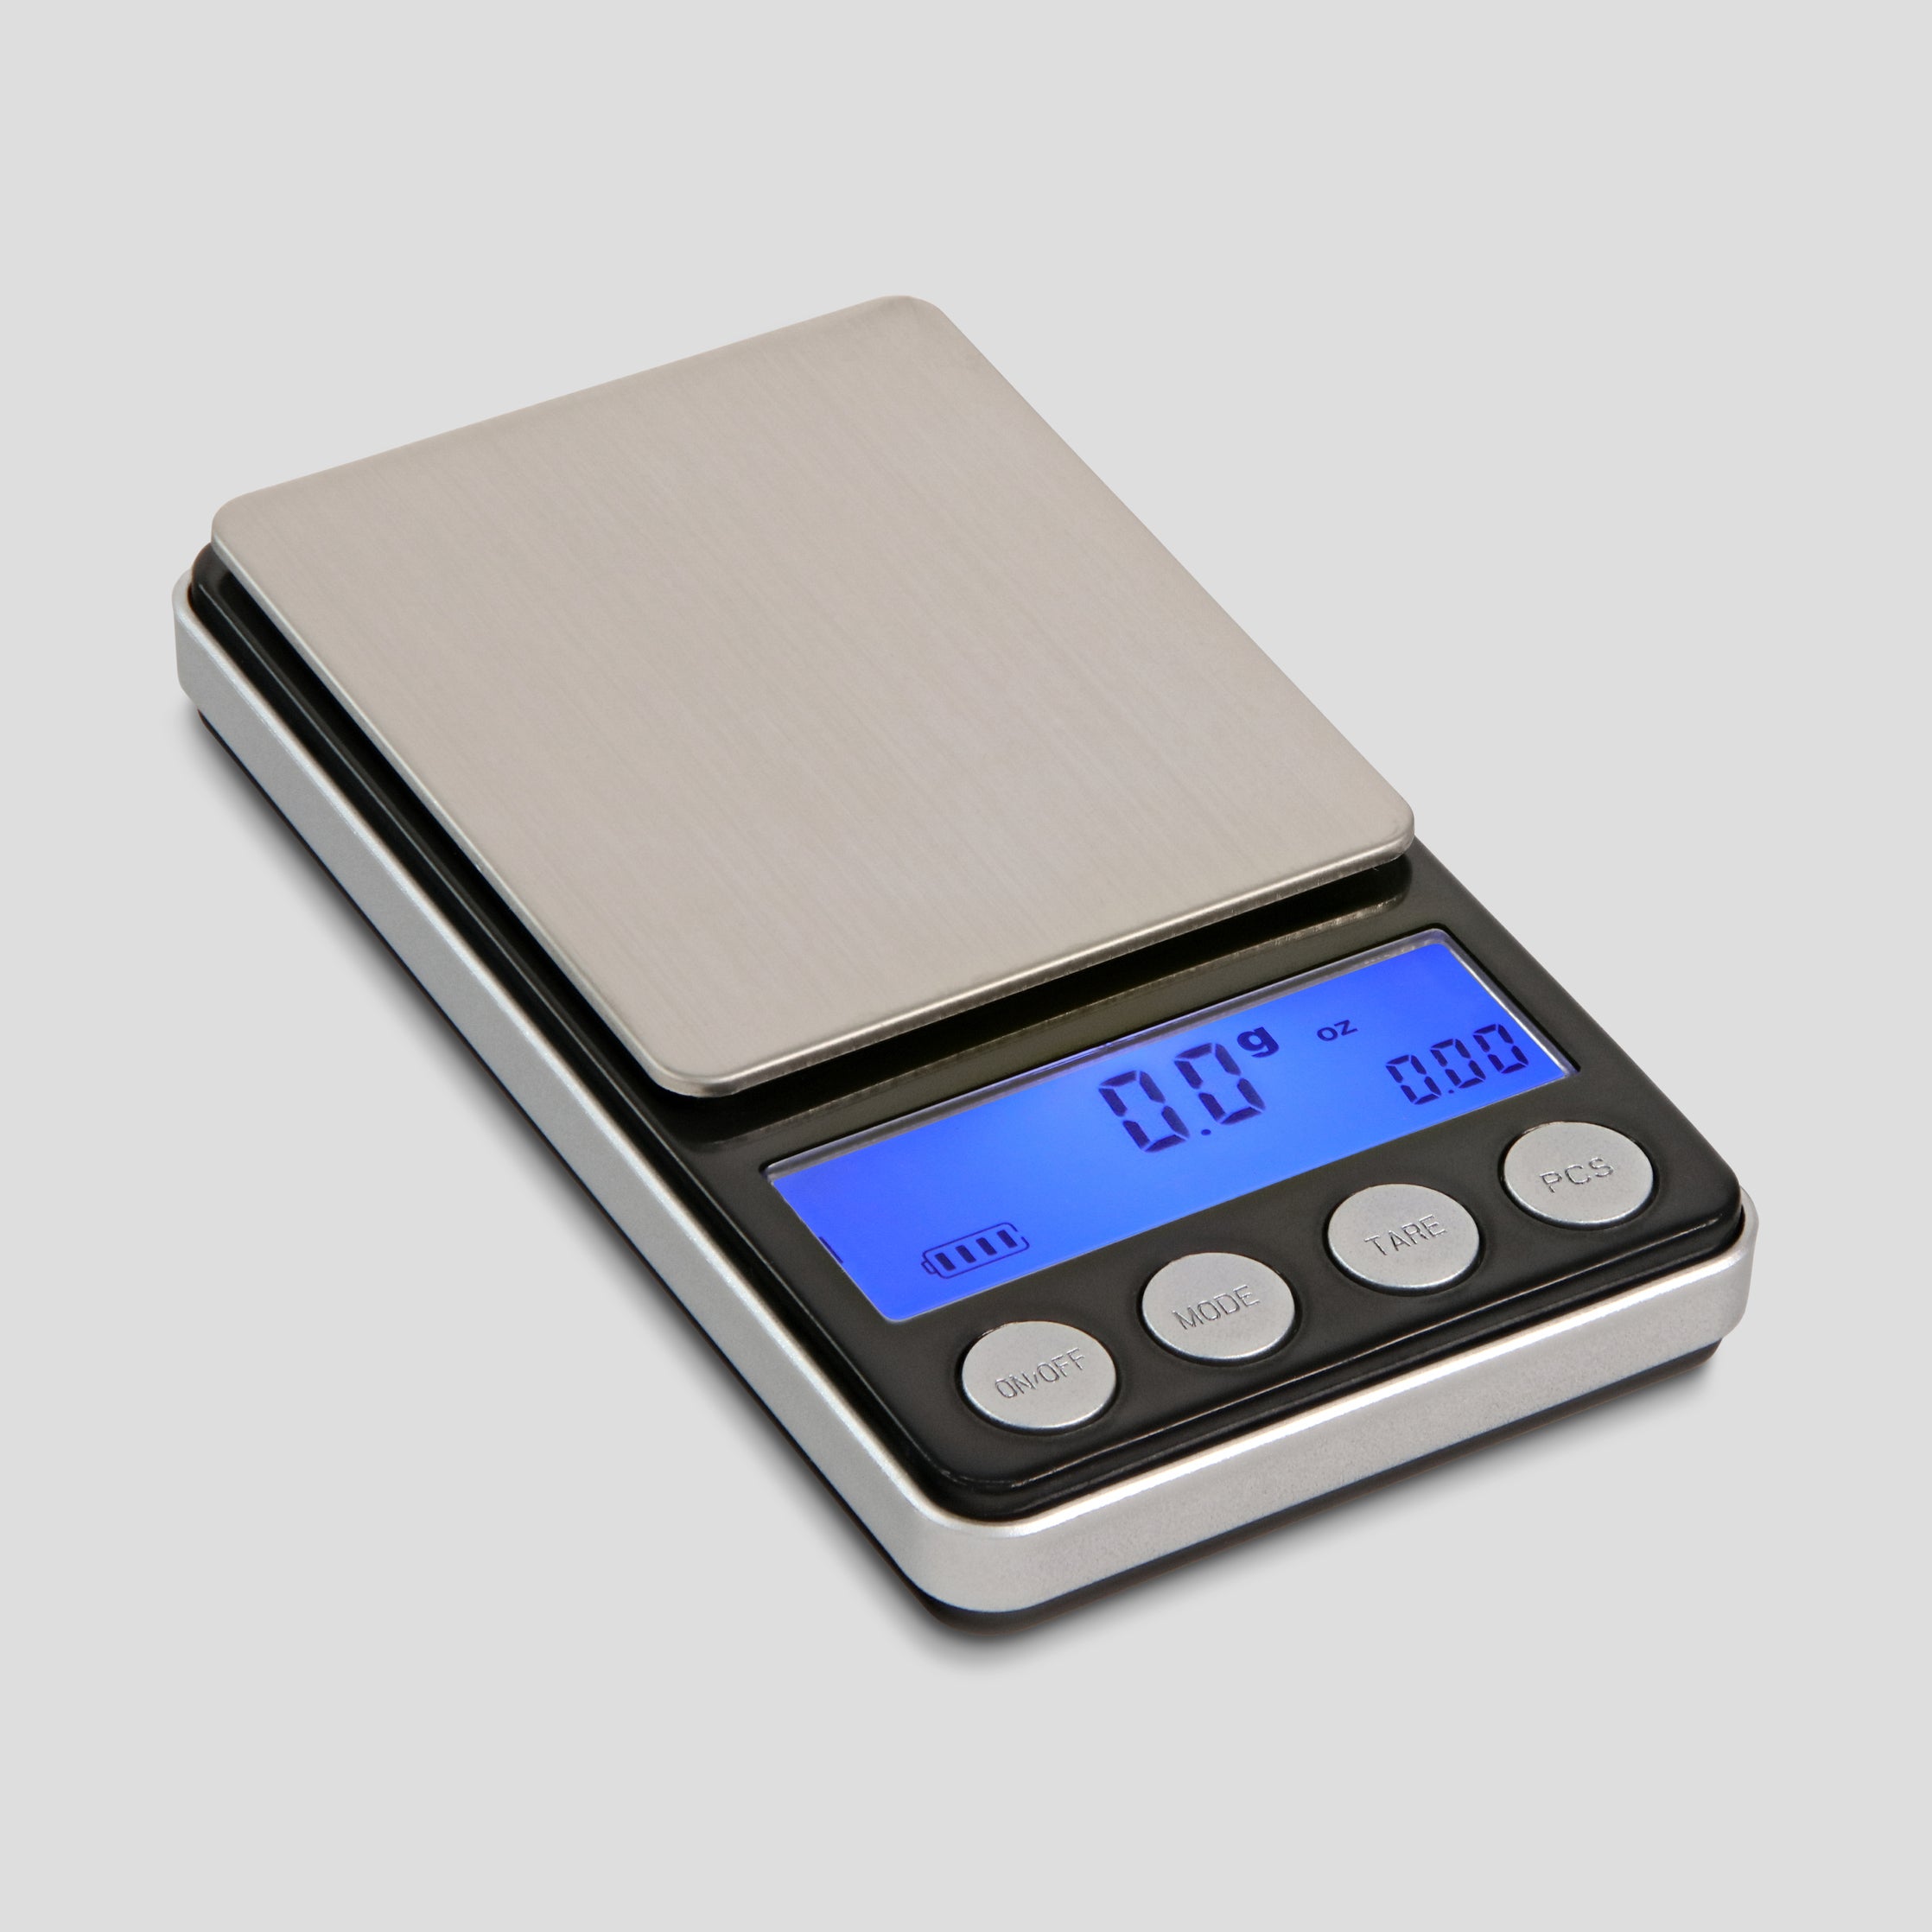 Omega Scales 200, KITCHEN SCALES, digital scales, pocket scales